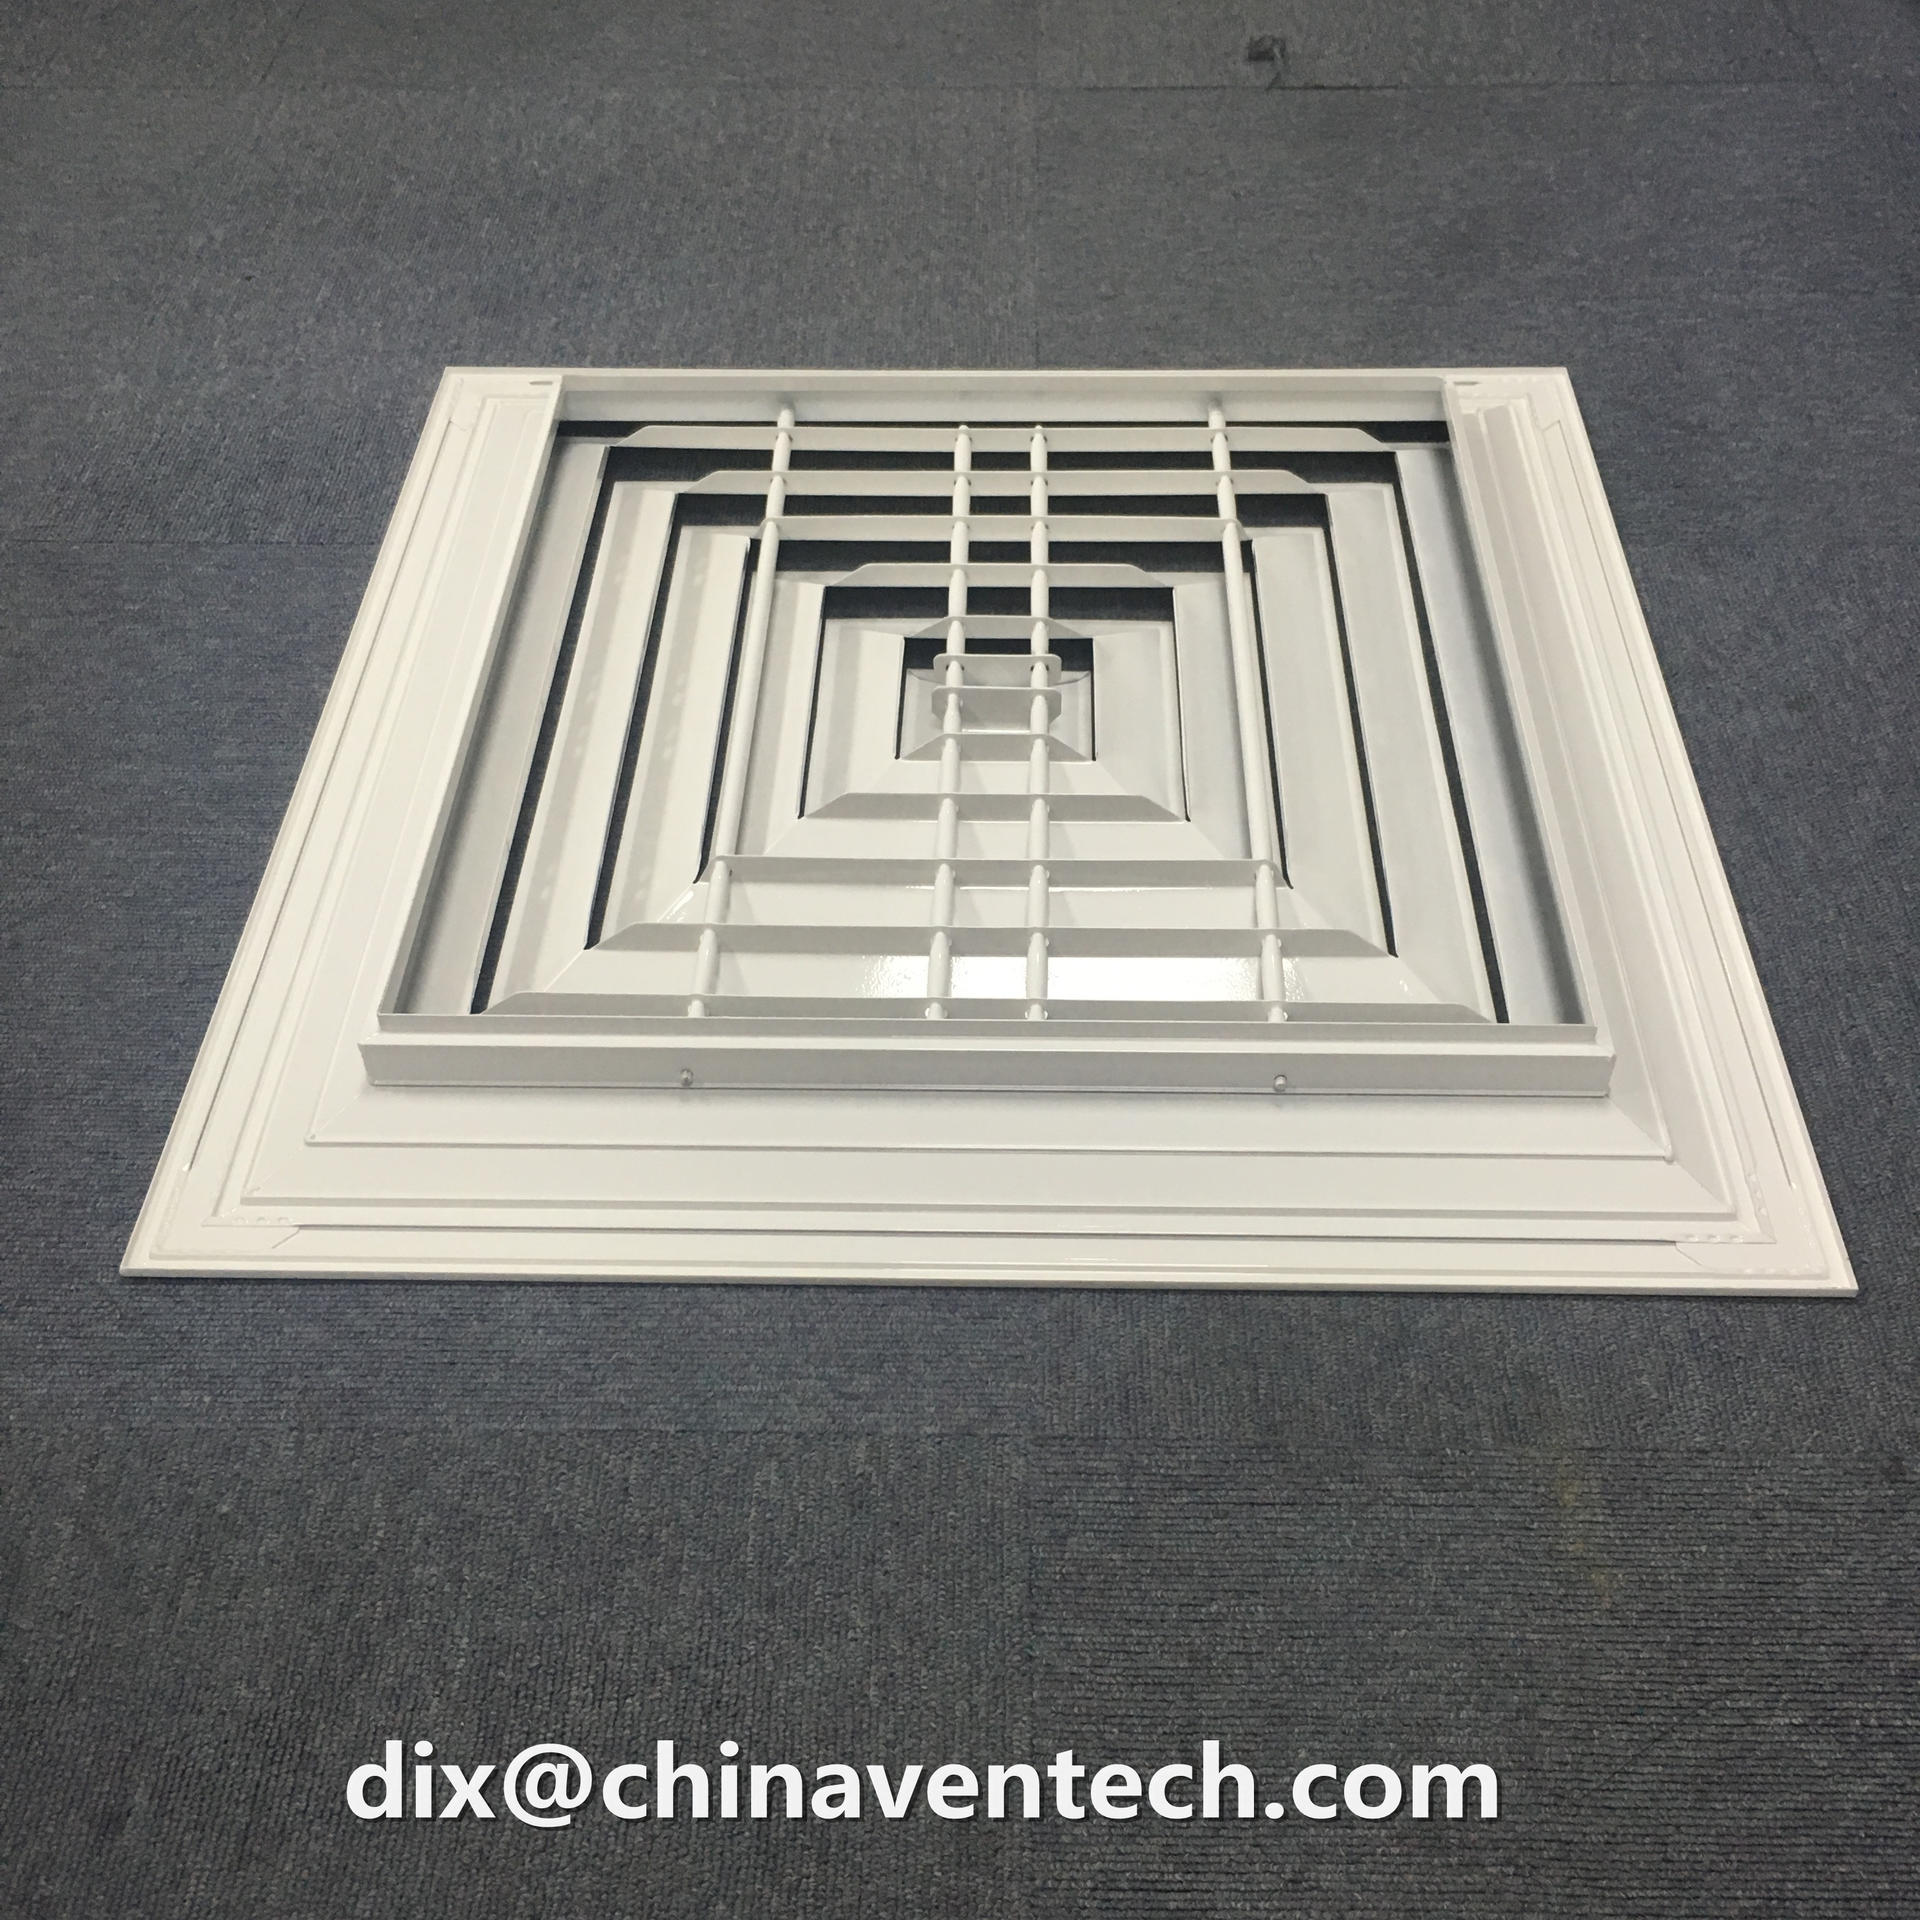 Hvac Air Tools Aluminum Square Ceiling Diffuser with & without damper